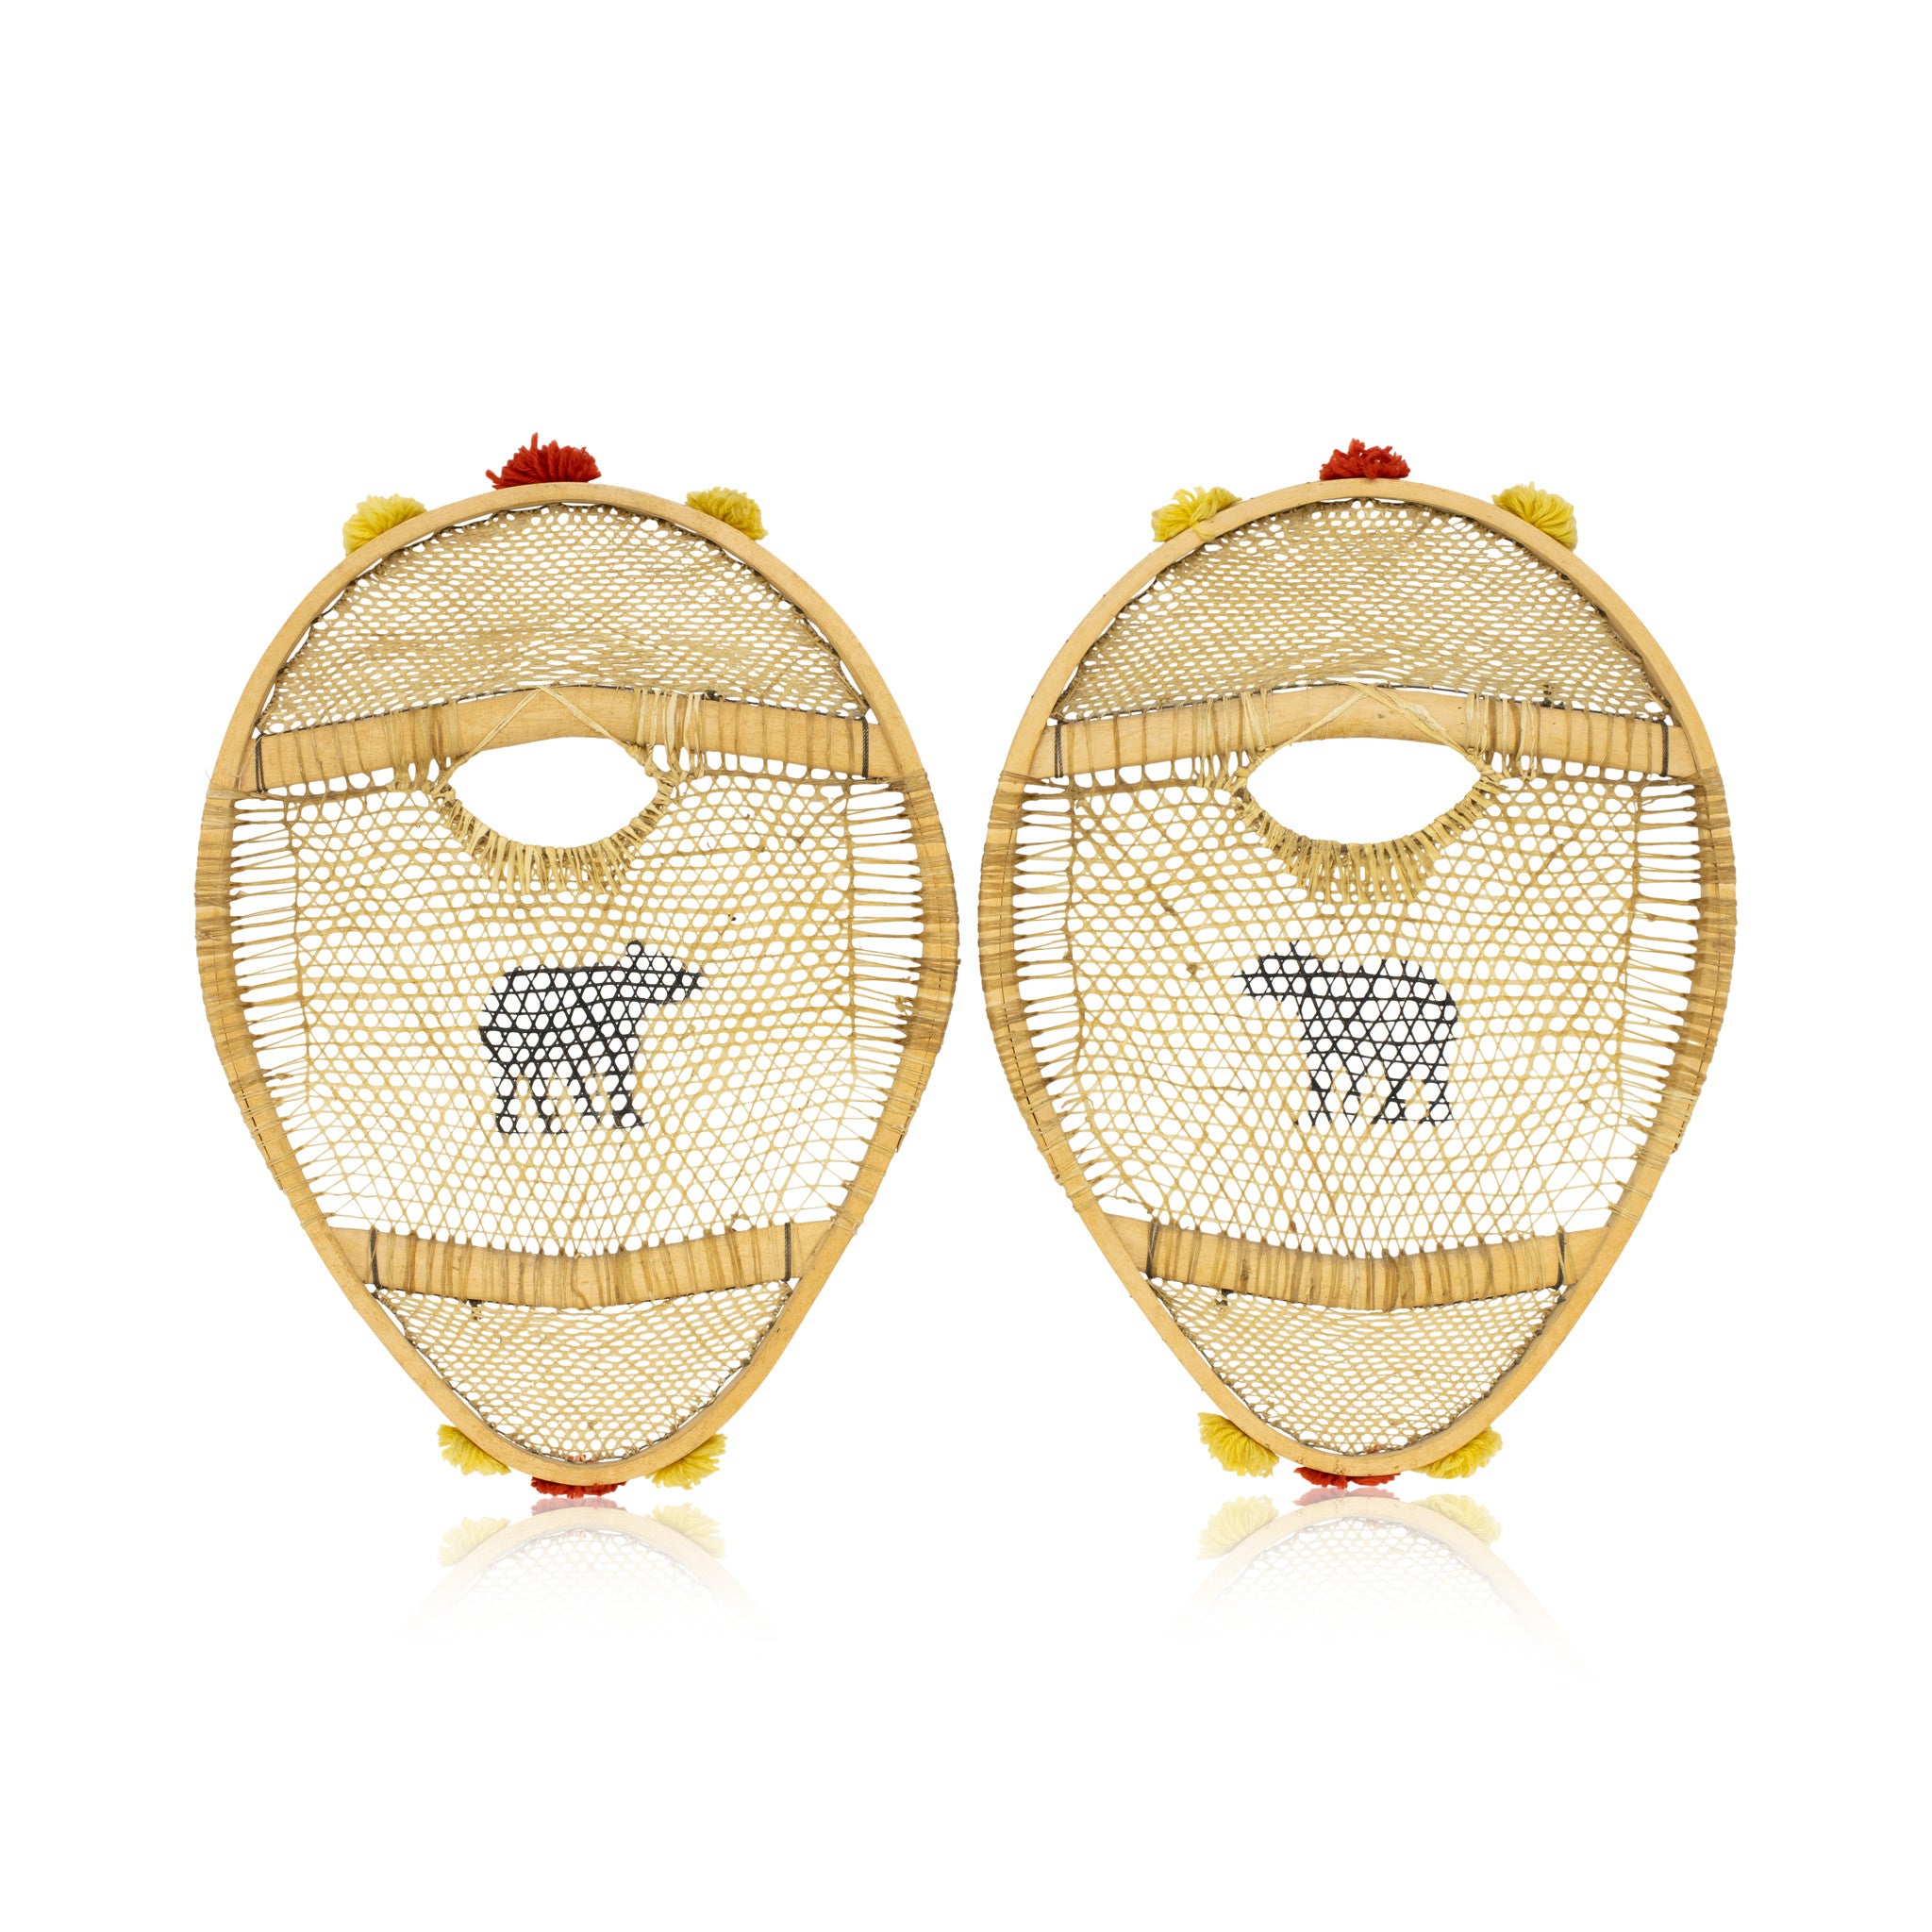 Bear Paw Snowshoes, Native, Snowshoes, Other